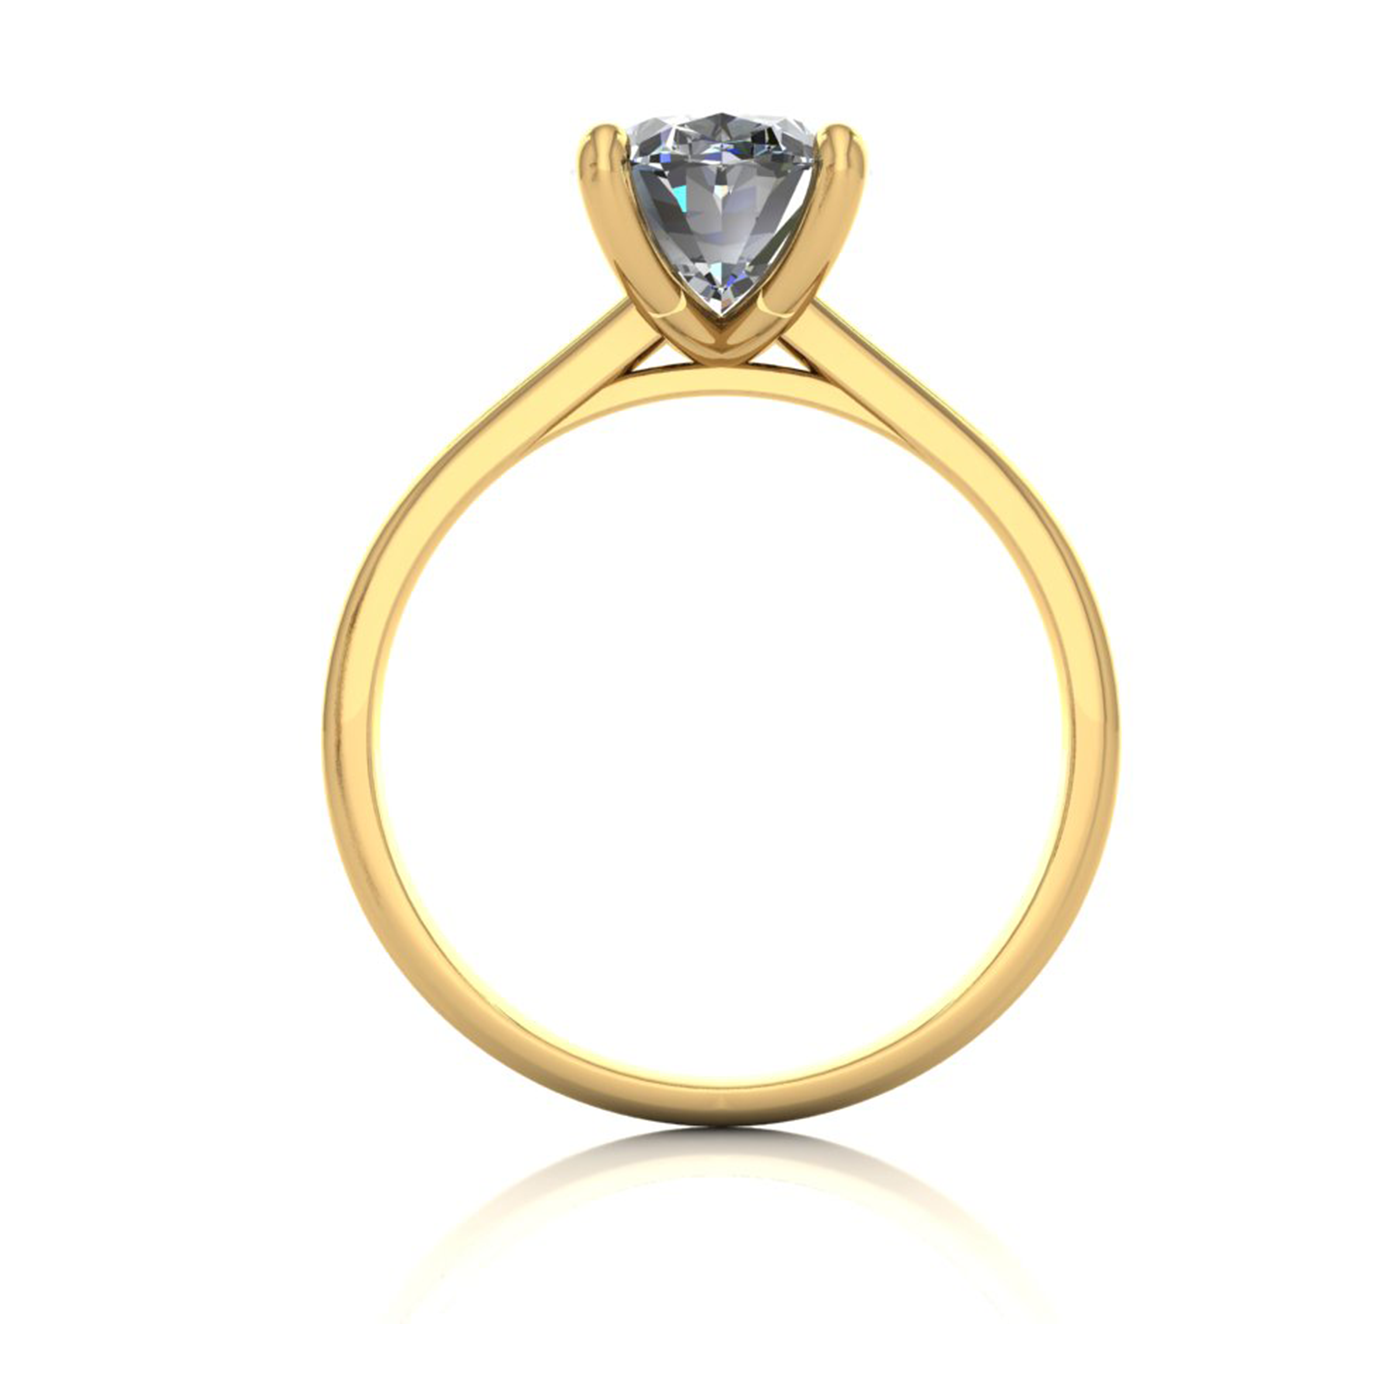 18k yellow gold  2,00 ct 4 prongs solitaire oval cut diamond engagement ring with whisper thin band